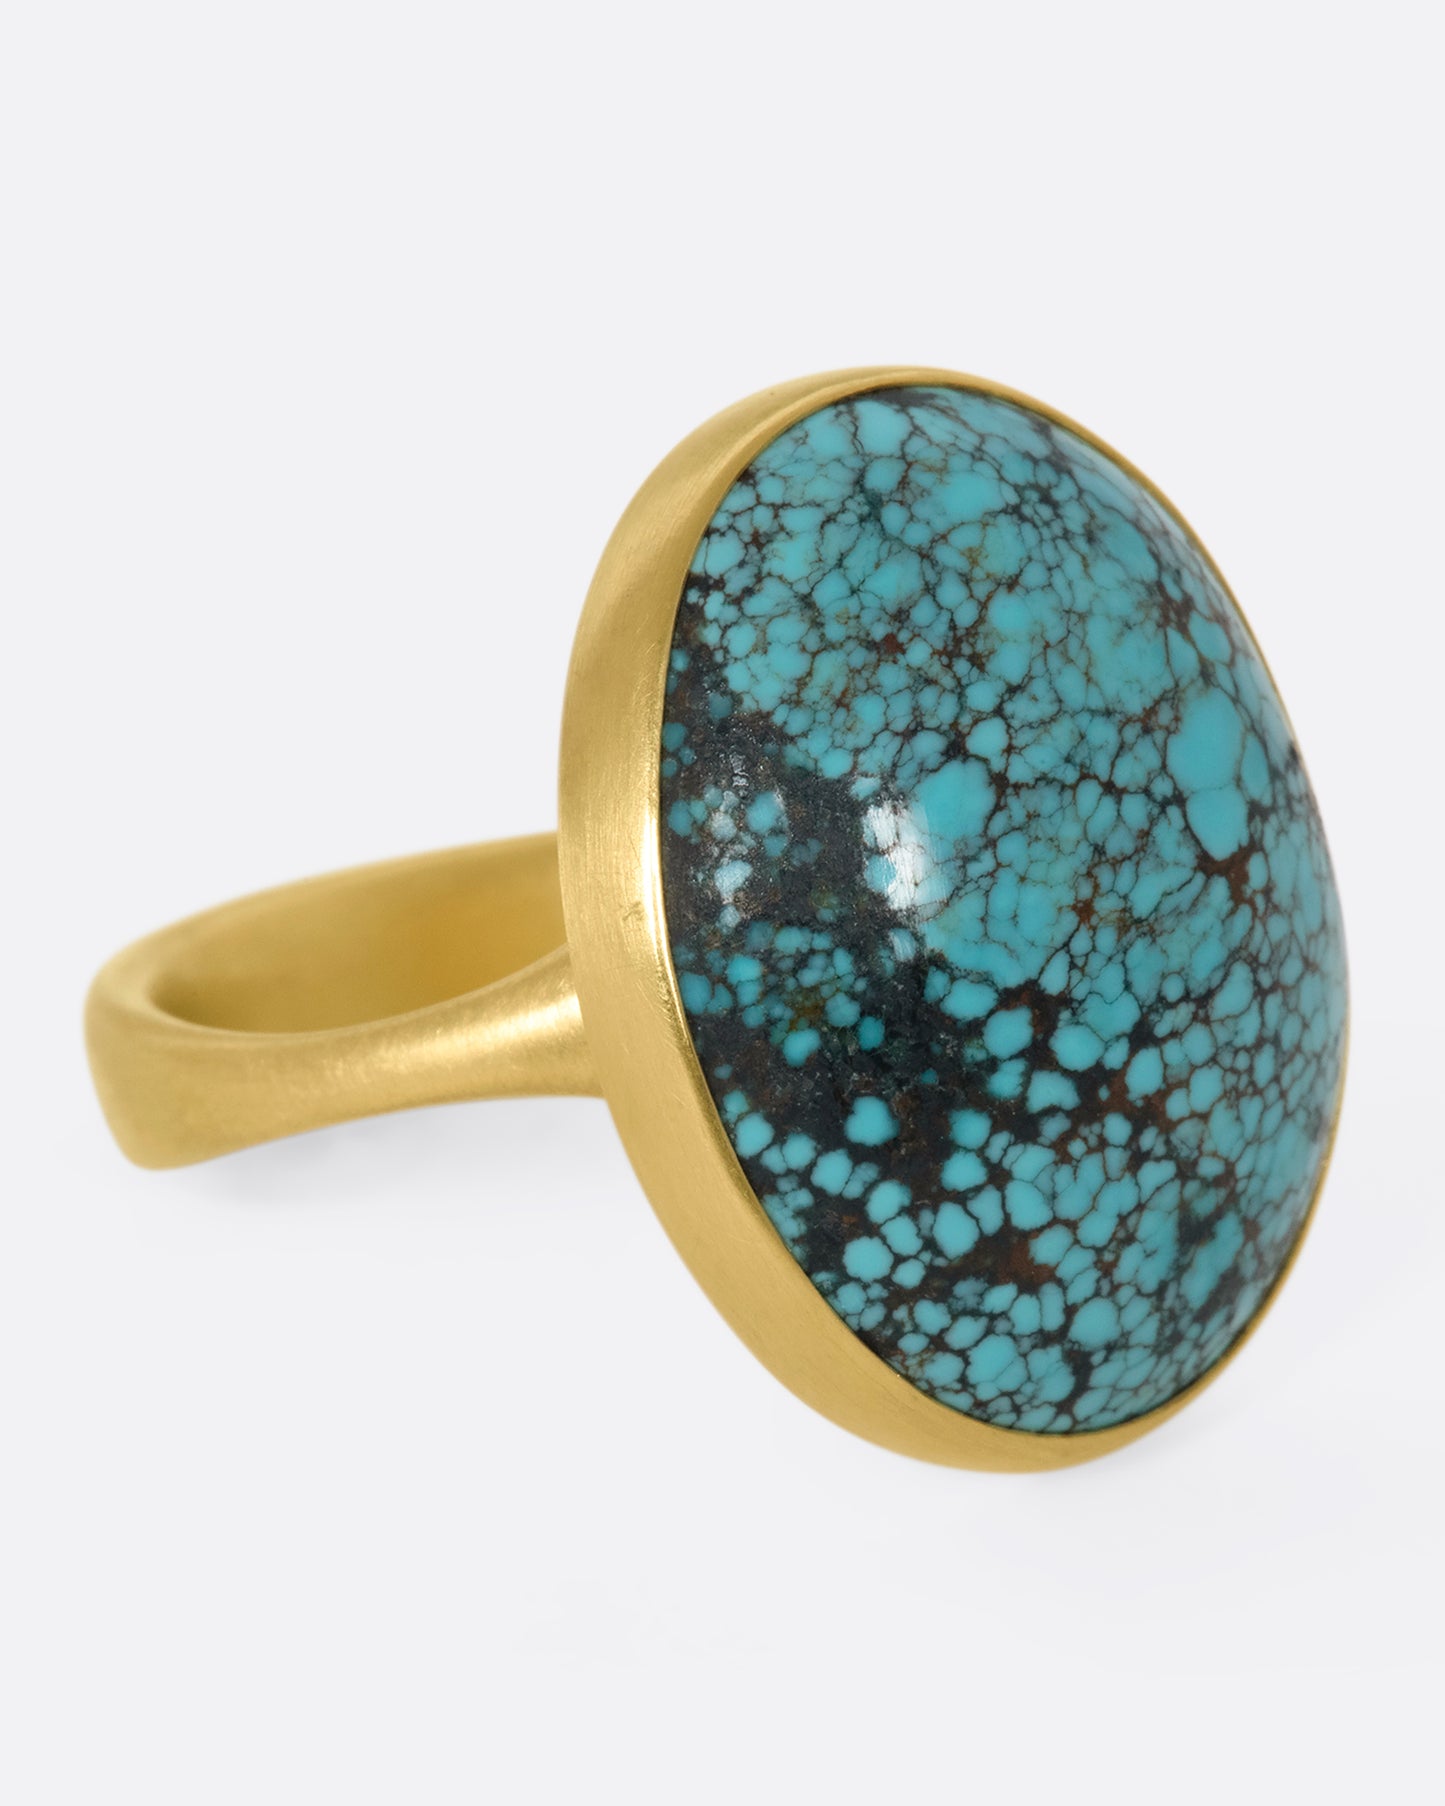 This 14k gold oval Tibetan turquoise ring is incredibly soft and comfortable